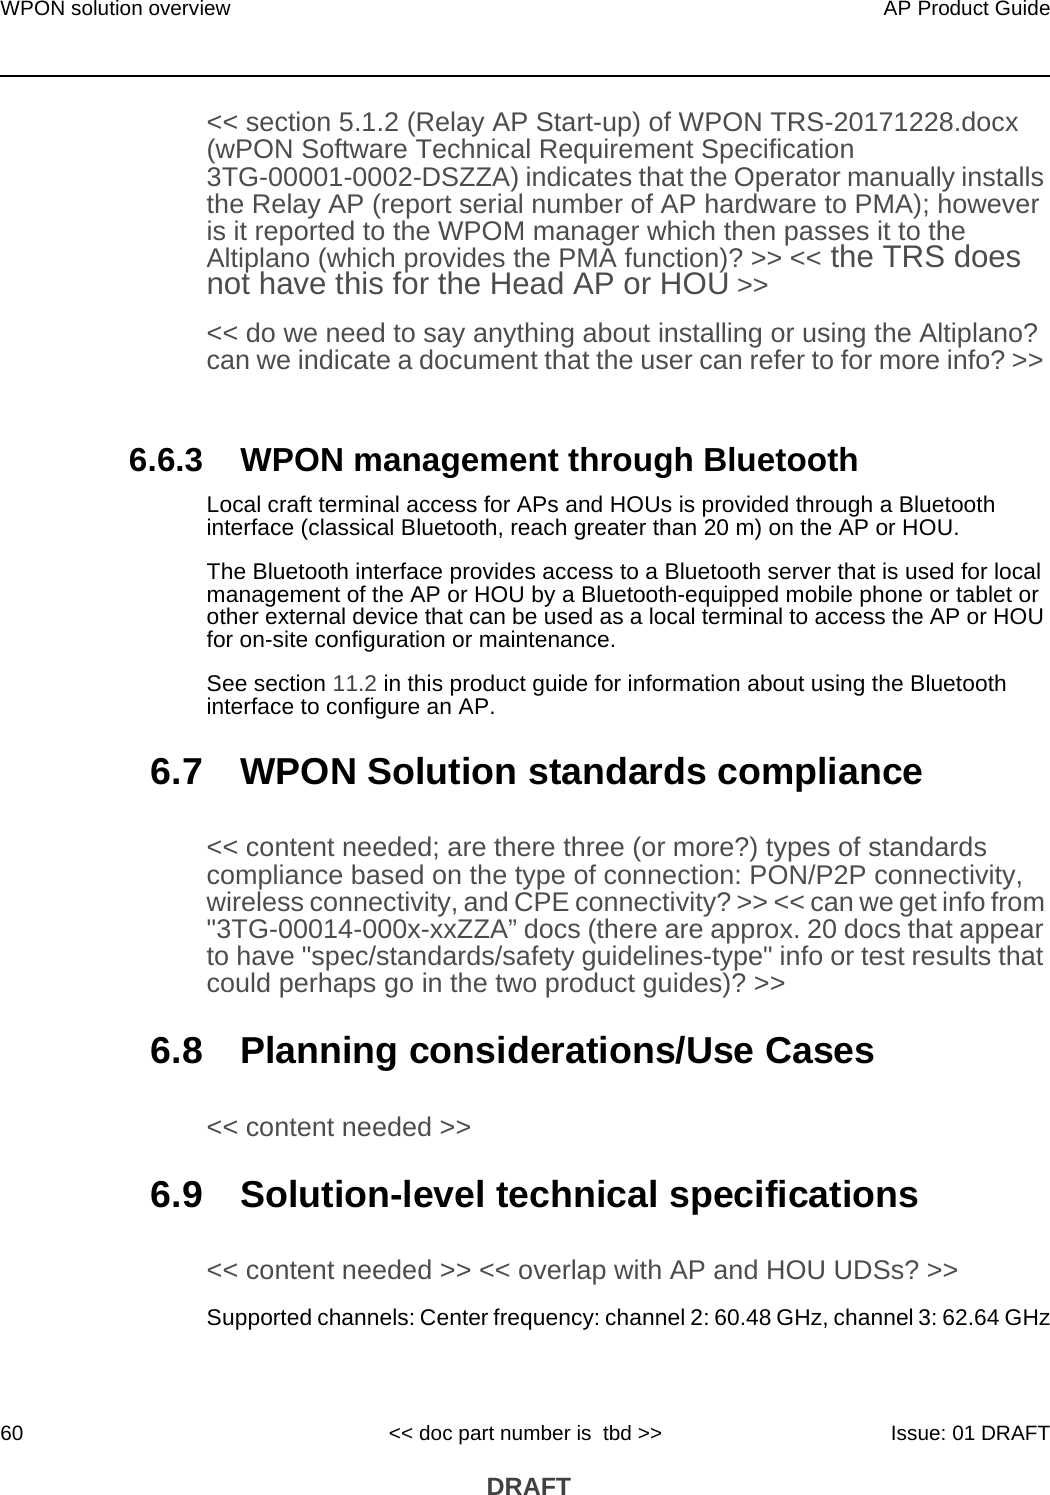 WPON solution overview60AP Product Guide&lt;&lt; doc part number is  tbd &gt;&gt; Issue: 01 DRAFT DRAFT&lt;&lt; section 5.1.2 (Relay AP Start-up) of WPON TRS-20171228.docx (wPON Software Technical Requirement Specification 3TG-00001-0002-DSZZA) indicates that the Operator manually installs the Relay AP (report serial number of AP hardware to PMA); however is it reported to the WPOM manager which then passes it to the Altiplano (which provides the PMA function)? &gt;&gt; &lt;&lt; the TRS does not have this for the Head AP or HOU &gt;&gt;&lt;&lt; do we need to say anything about installing or using the Altiplano? can we indicate a document that the user can refer to for more info? &gt;&gt; 6.6.3 WPON management through Bluetooth Local craft terminal access for APs and HOUs is provided through a Bluetooth interface (classical Bluetooth, reach greater than 20 m) on the AP or HOU.The Bluetooth interface provides access to a Bluetooth server that is used for local management of the AP or HOU by a Bluetooth-equipped mobile phone or tablet or other external device that can be used as a local terminal to access the AP or HOU for on-site configuration or maintenance. See section 11.2 in this product guide for information about using the Bluetooth interface to configure an AP.6.7 WPON Solution standards compliance&lt;&lt; content needed; are there three (or more?) types of standards compliance based on the type of connection: PON/P2P connectivity, wireless connectivity, and CPE connectivity? &gt;&gt; &lt;&lt; can we get info from &quot;3TG-00014-000x-xxZZA” docs (there are approx. 20 docs that appear to have &quot;spec/standards/safety guidelines-type&quot; info or test results that could perhaps go in the two product guides)? &gt;&gt;6.8 Planning considerations/Use Cases&lt;&lt; content needed &gt;&gt;6.9 Solution-level technical specifications&lt;&lt; content needed &gt;&gt; &lt;&lt; overlap with AP and HOU UDSs? &gt;&gt;Supported channels: Center frequency: channel 2: 60.48 GHz, channel 3: 62.64 GHz